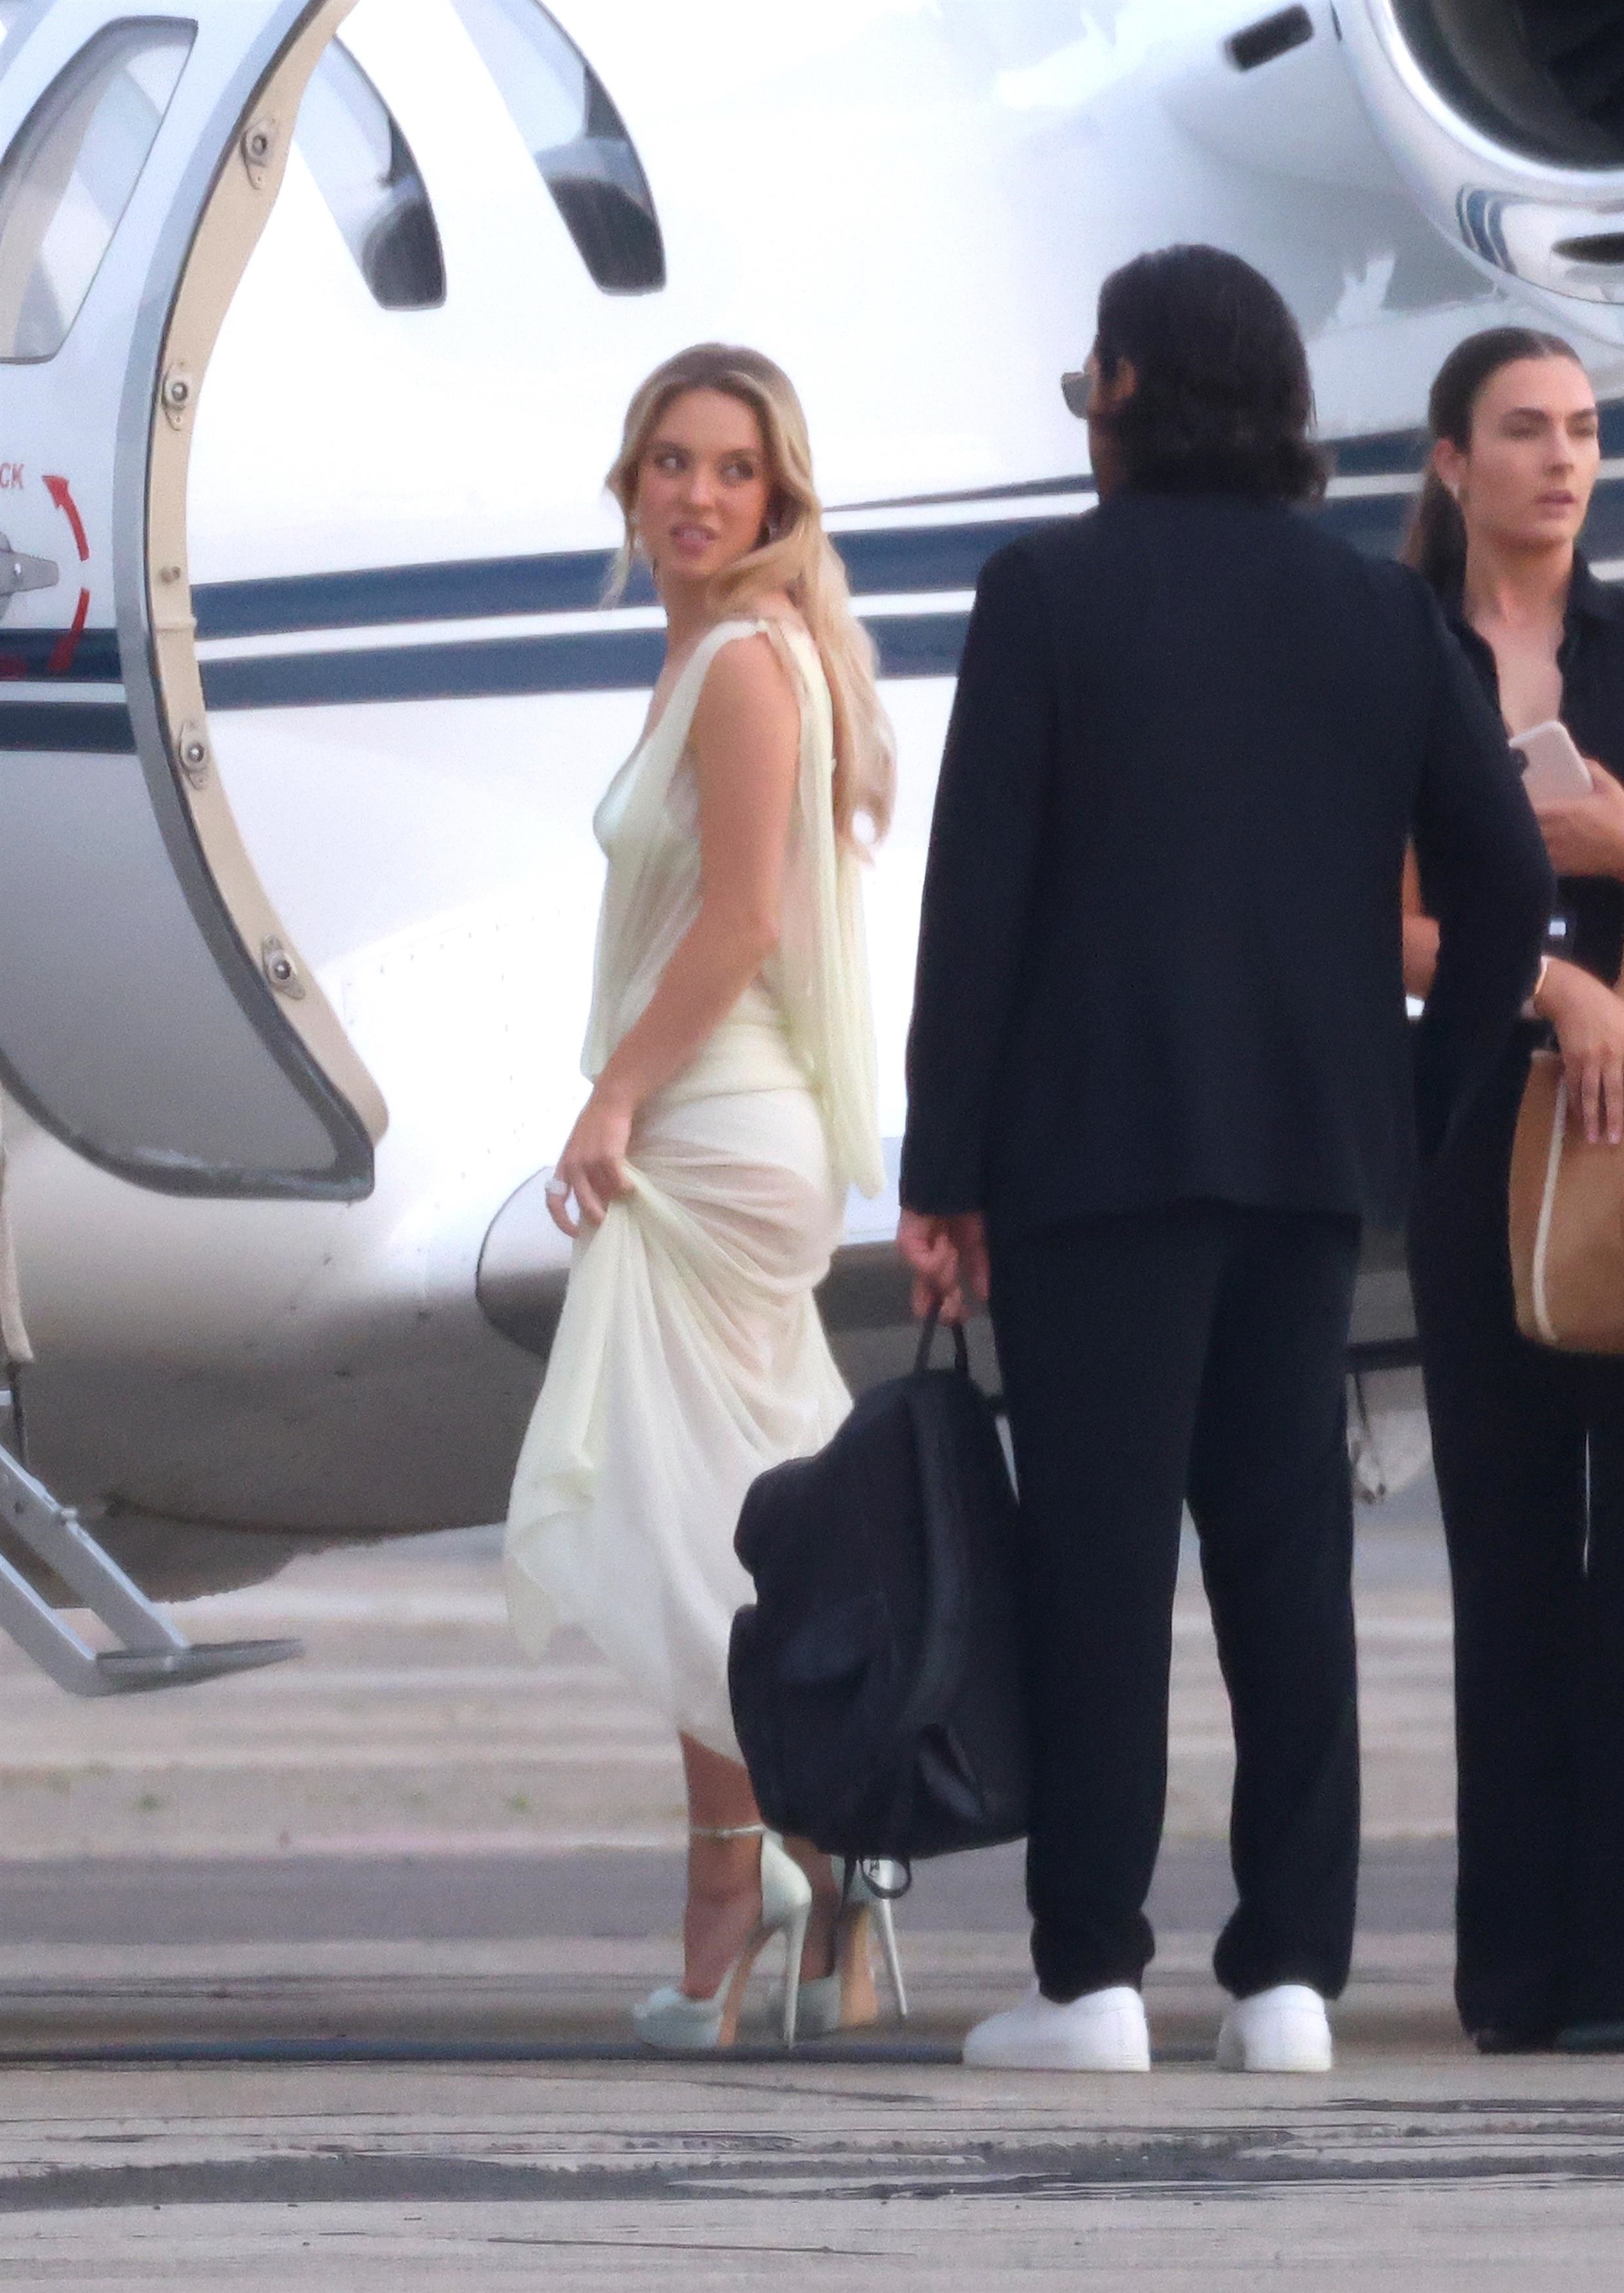 Sweeney and Davino board a private jet out of Sydney, Australia, after her movie premiere